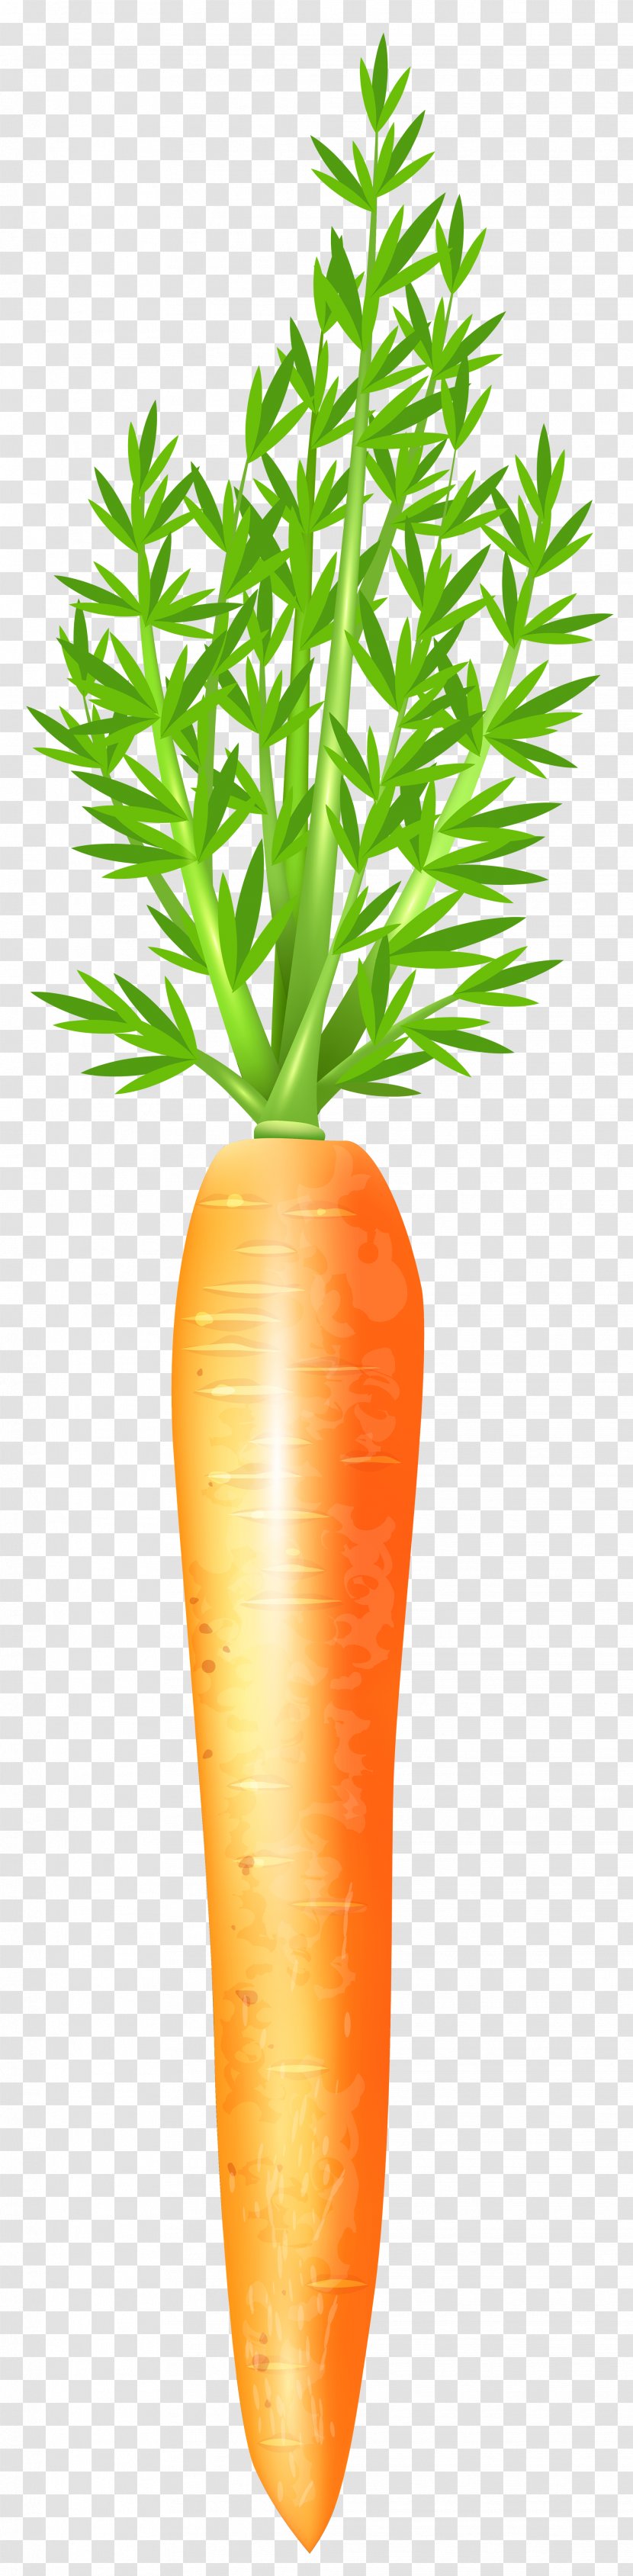 Carrot Clip Art - Baby - Free Image Transparent PNG